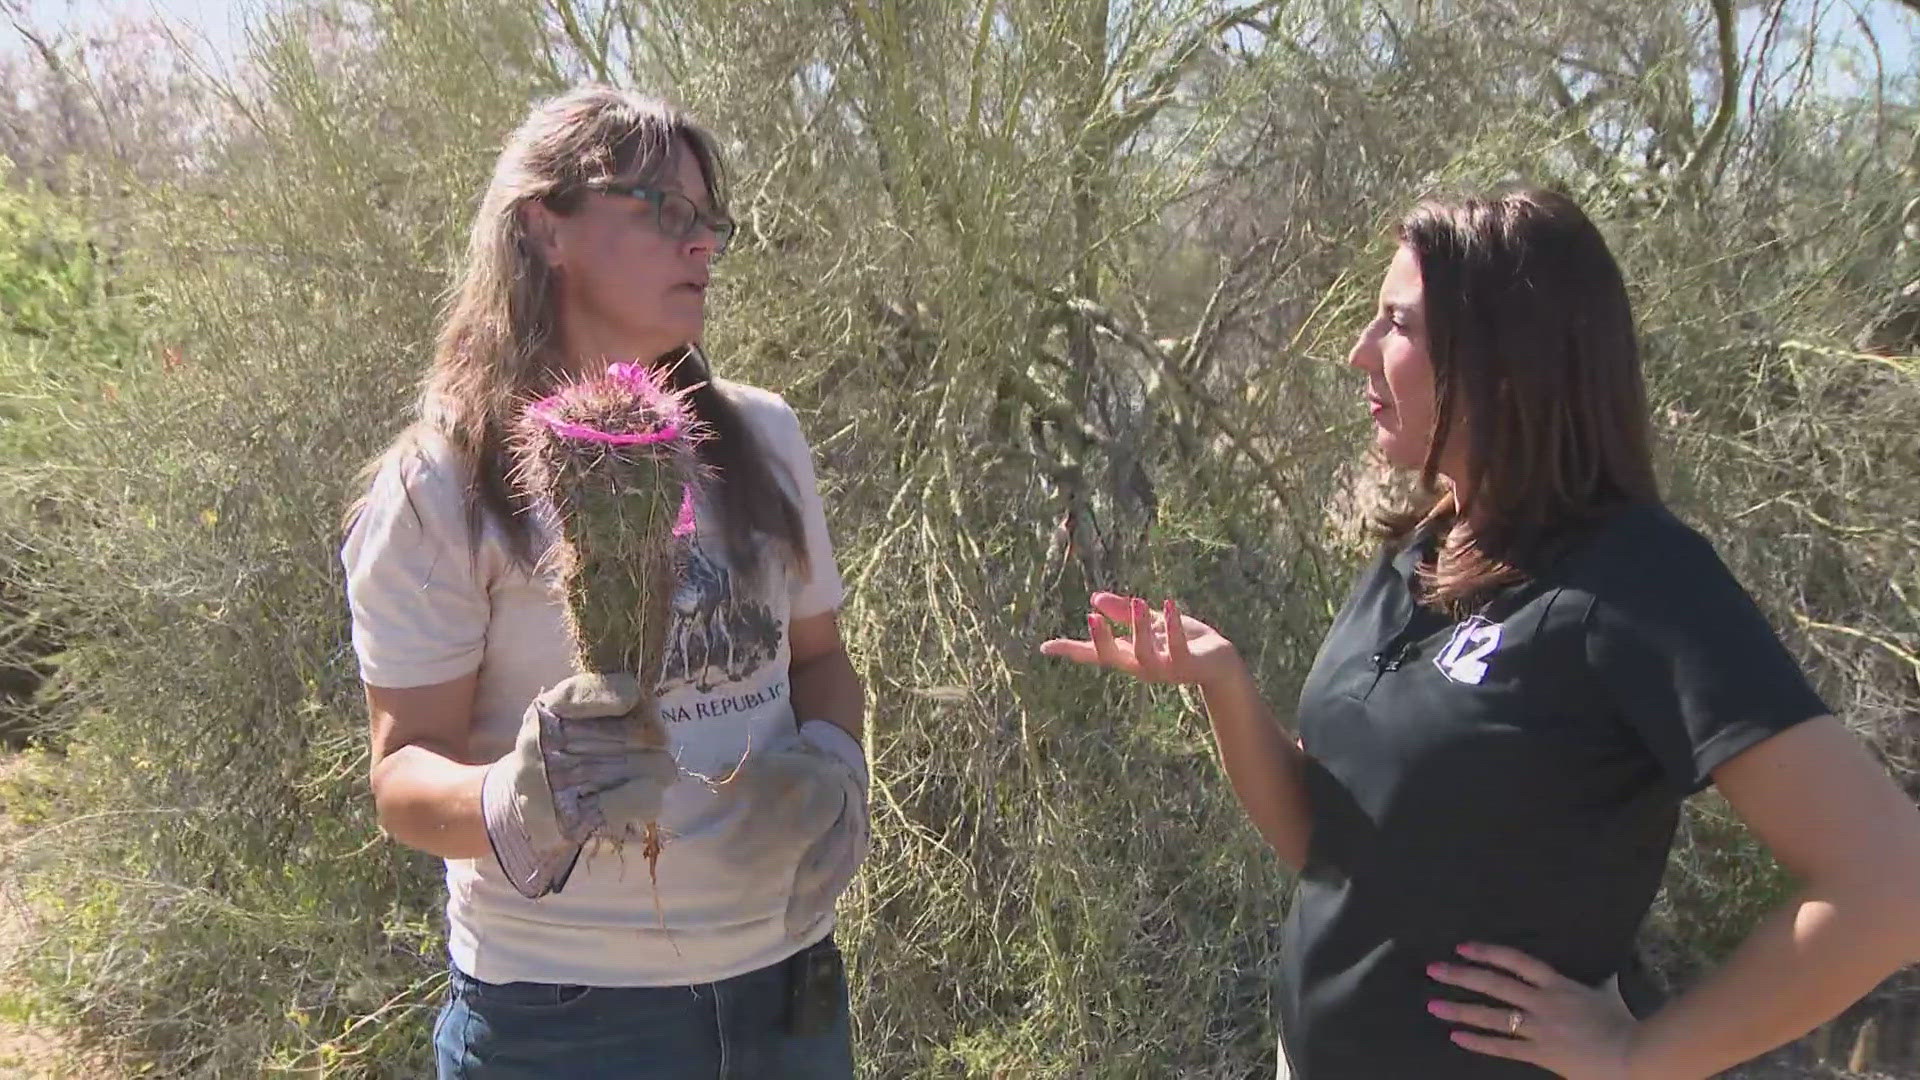 She may be an engineer by trade, but Jenny Vitale has another passion: cactus rescue.